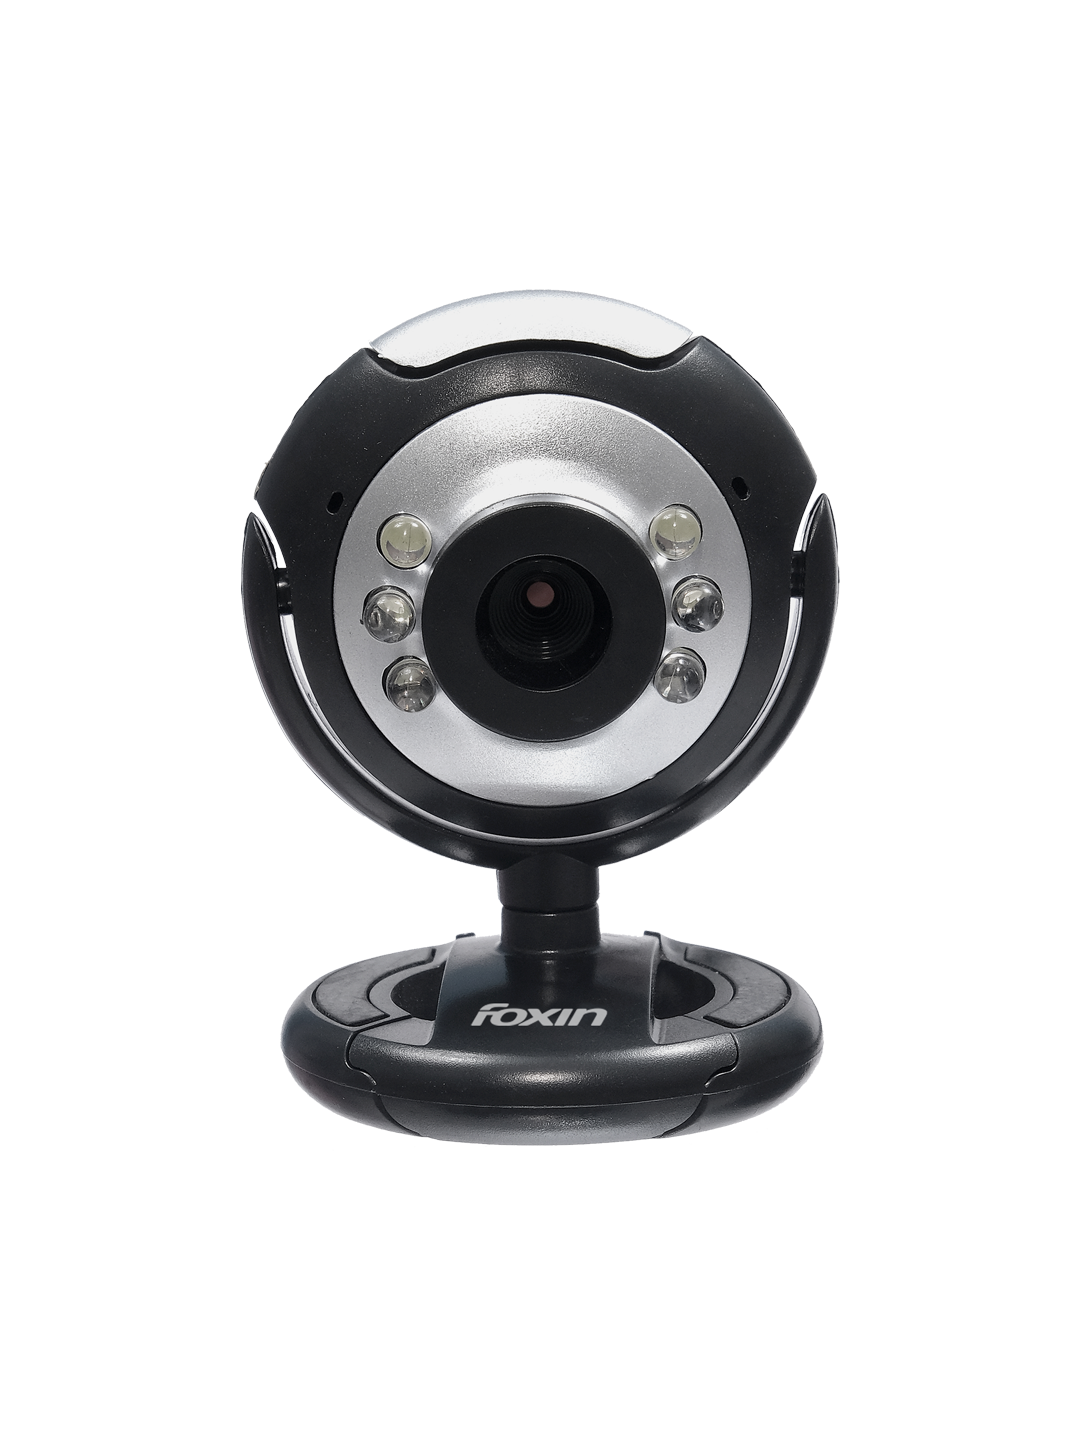 Foxin Webcam - Buy Web Camera with Mic at the Best Price Tagged